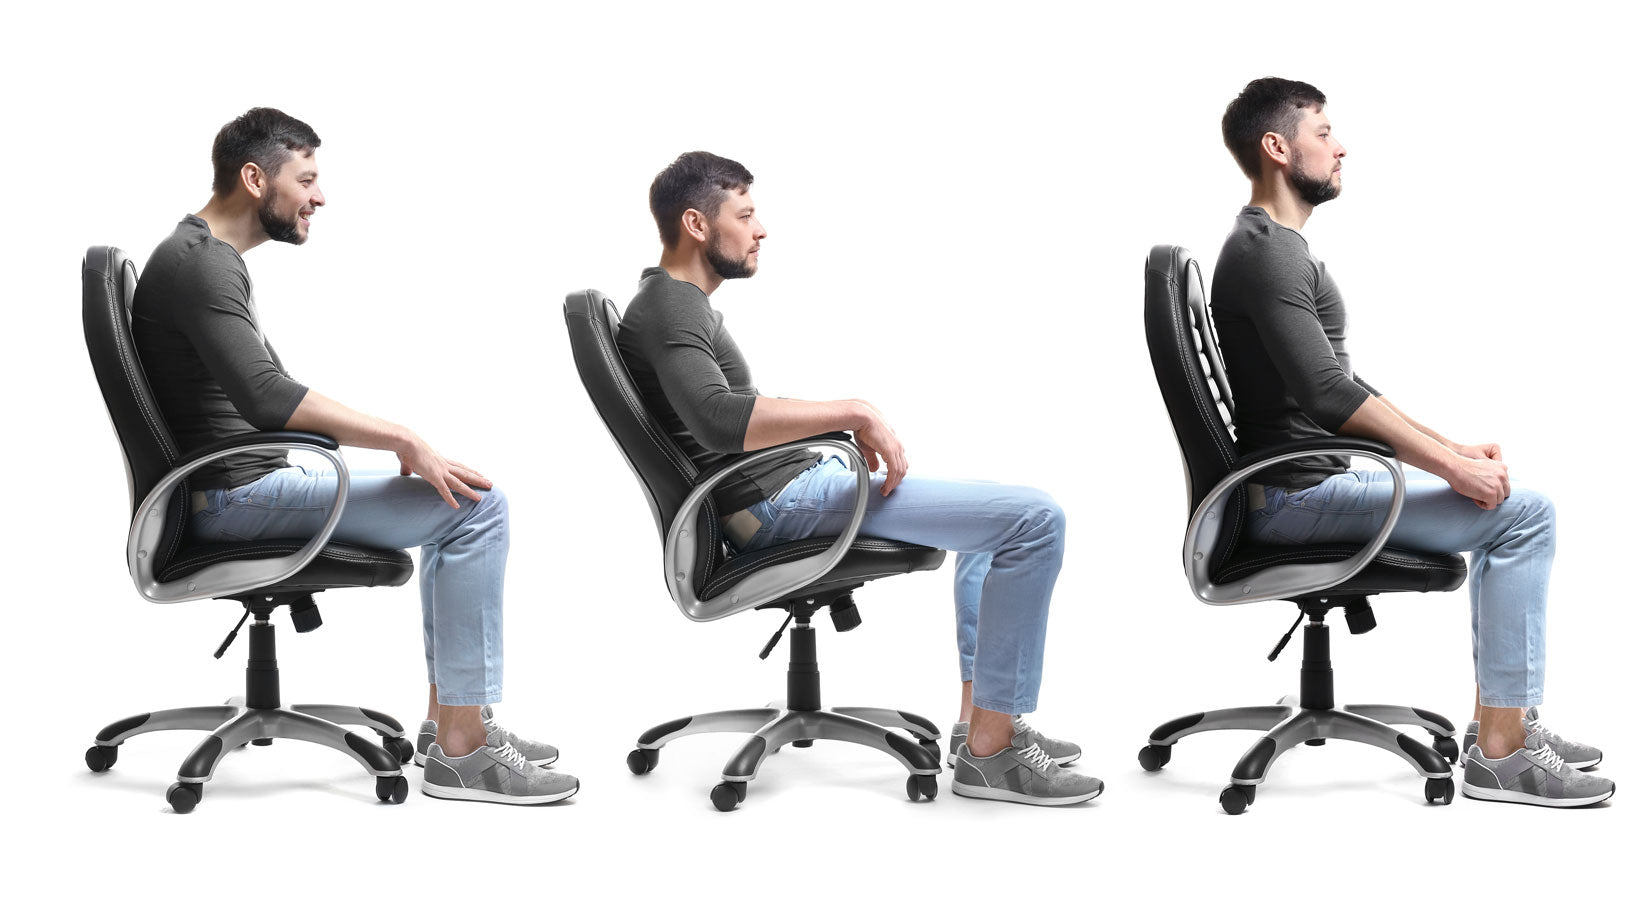 man with poor posture sitting in office chair